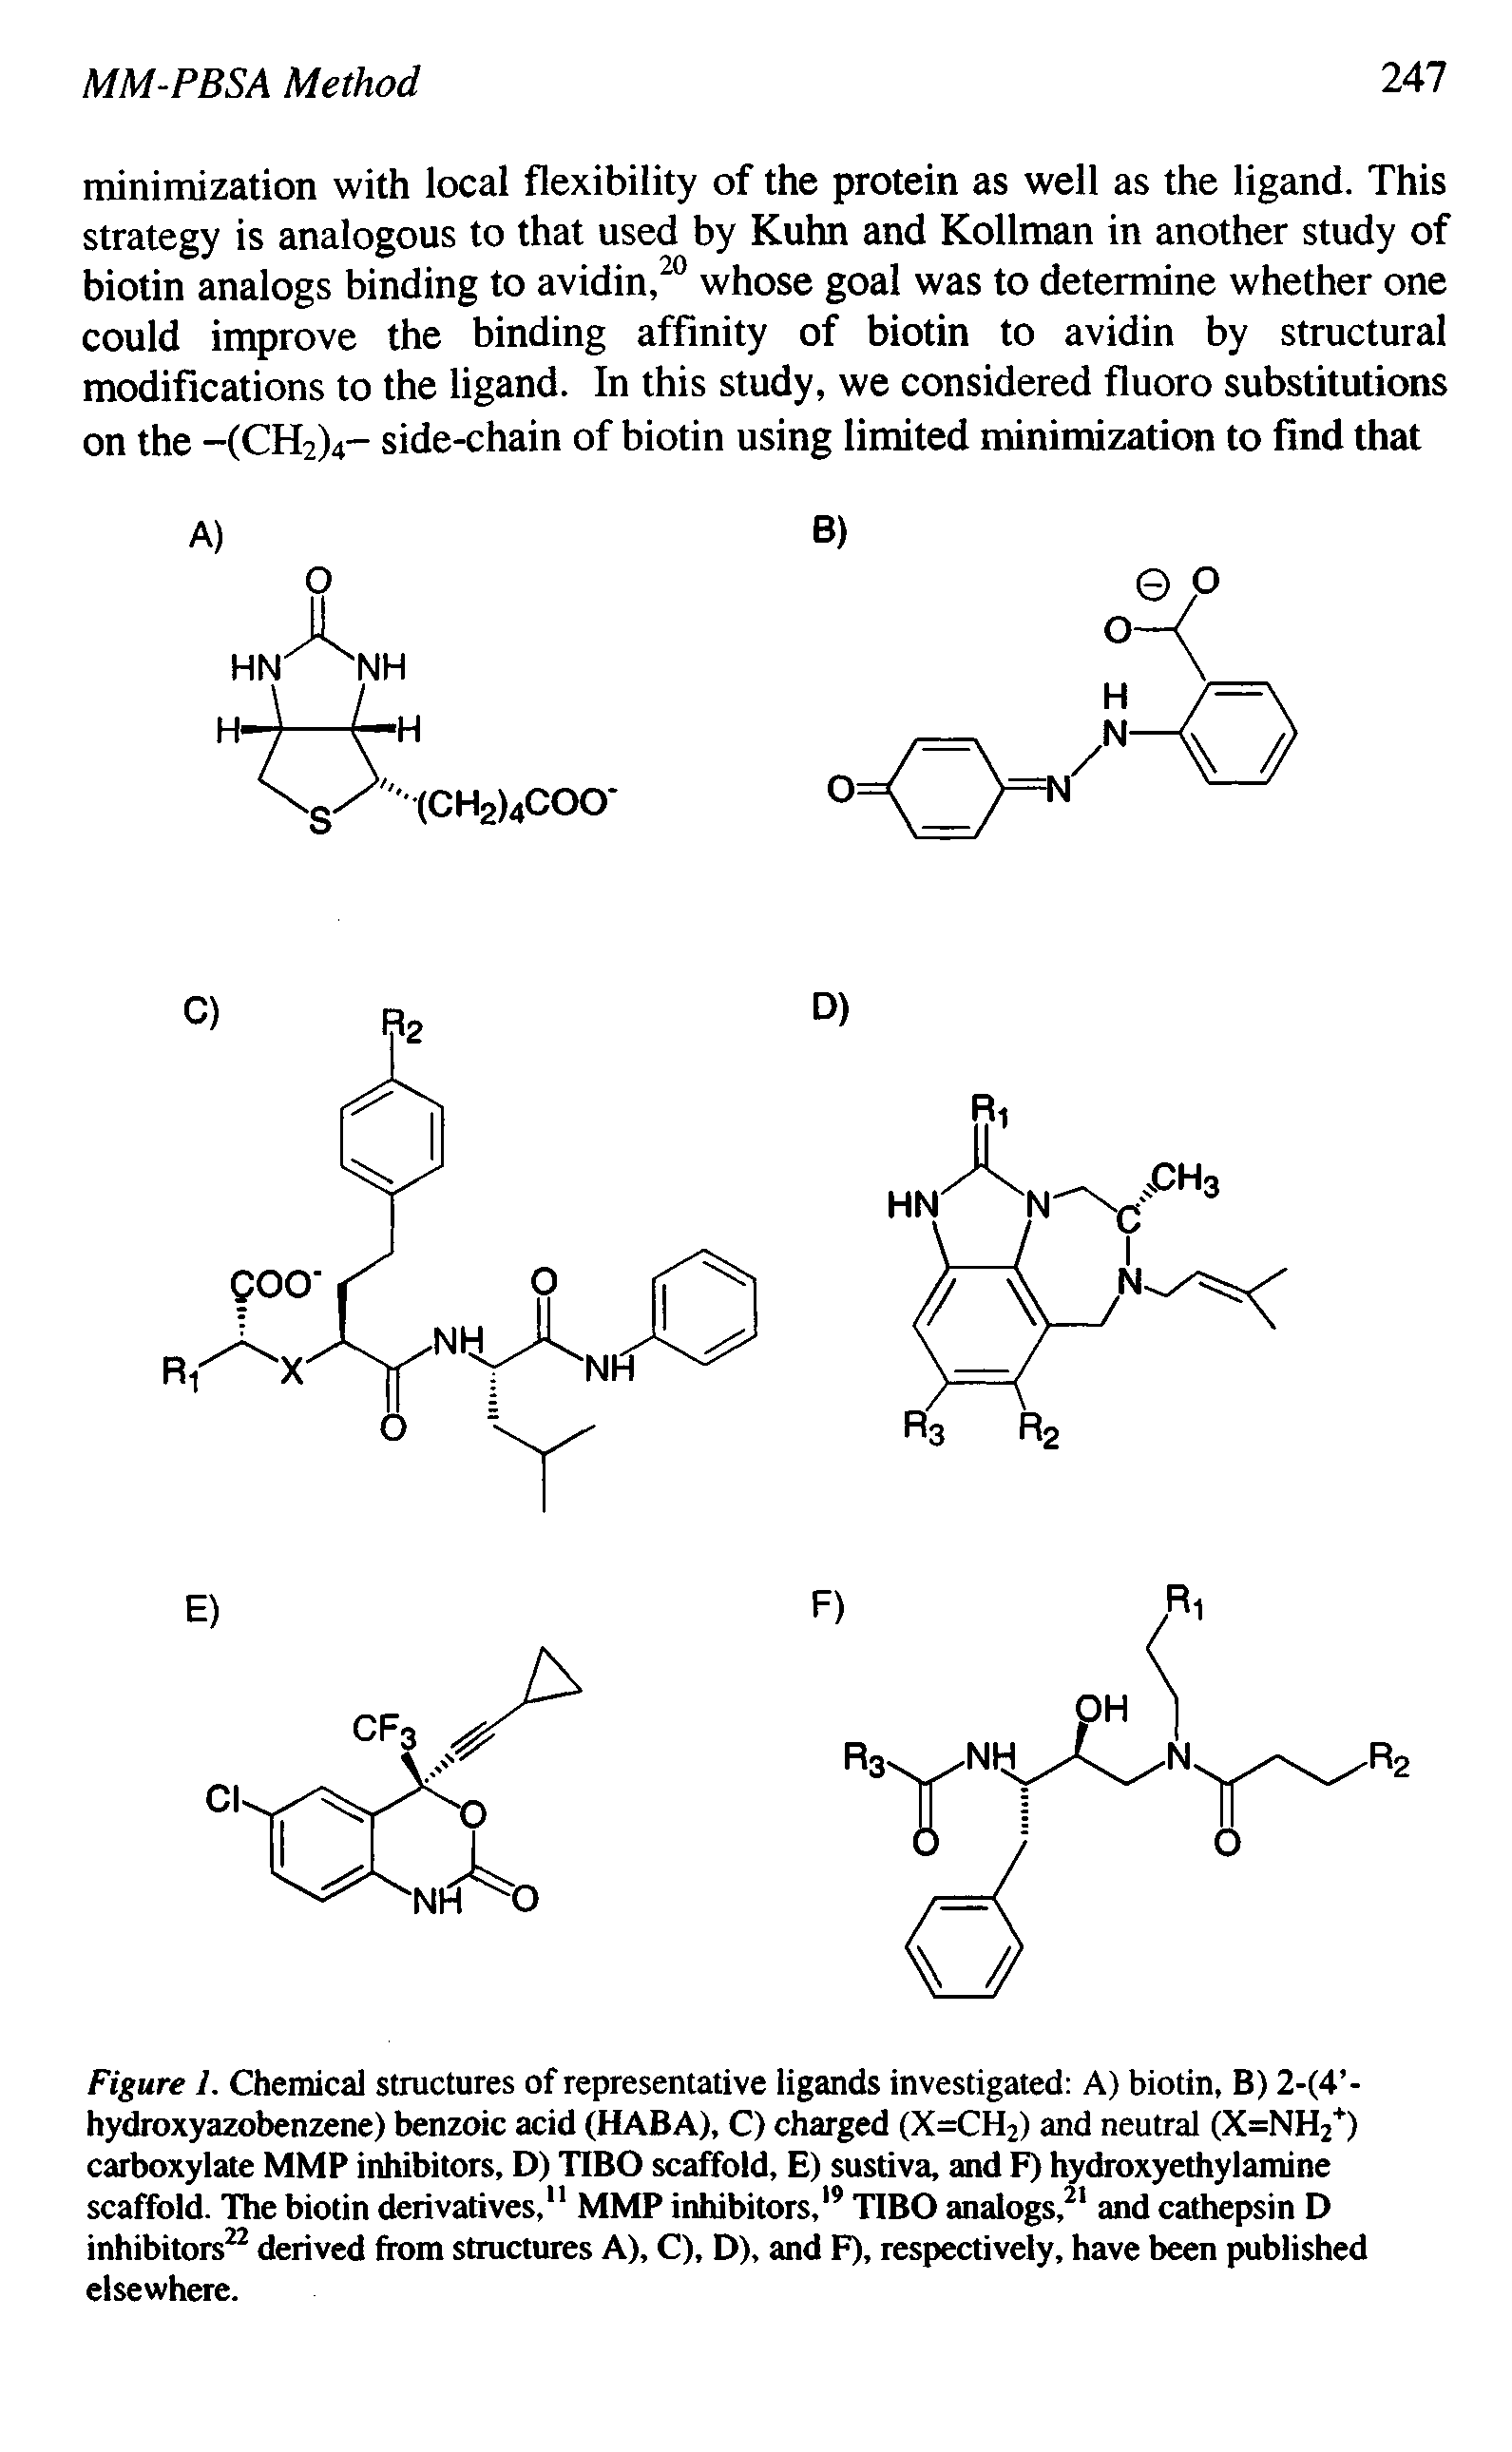 Figure 1. Chemical structures of representative ligands investigated A) biotin, B) 2-(4 -hydroxyazobenzene) benzoic acid (HABA), C) charged (X=CH2) and neutral (X=NH2+) carboxylate MMP inhibitors, D) TIBO scaffold, E) sustiva, and F) hydroxyethylamine scaffold. The biotin derivatives," MMP inhibitors,19 TIBO analogs,21 and cathepsin D inhibitors22 derived from structures A), C), D), and F), respectively, have been published elsewhere.